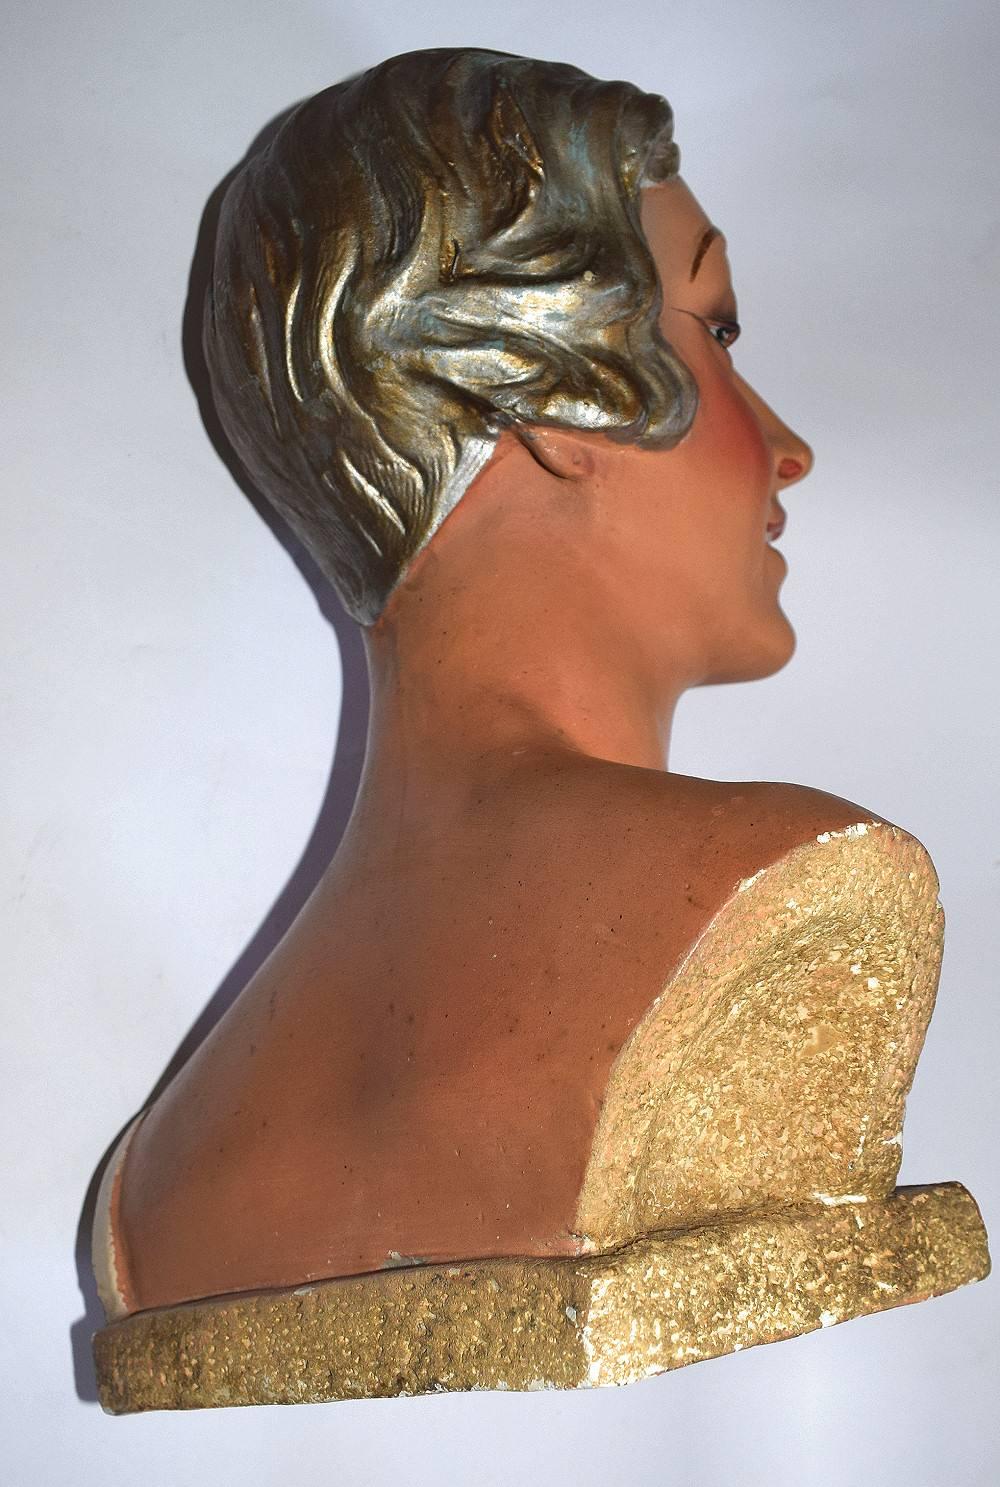 Wonderful and totally authentic almost life-size English mannequin bust. Manufactured from the 1920s through to the 1930s this beautiful figure would be Ideal for dressing tables to glam them up, can display hats and jewellery or just display her as